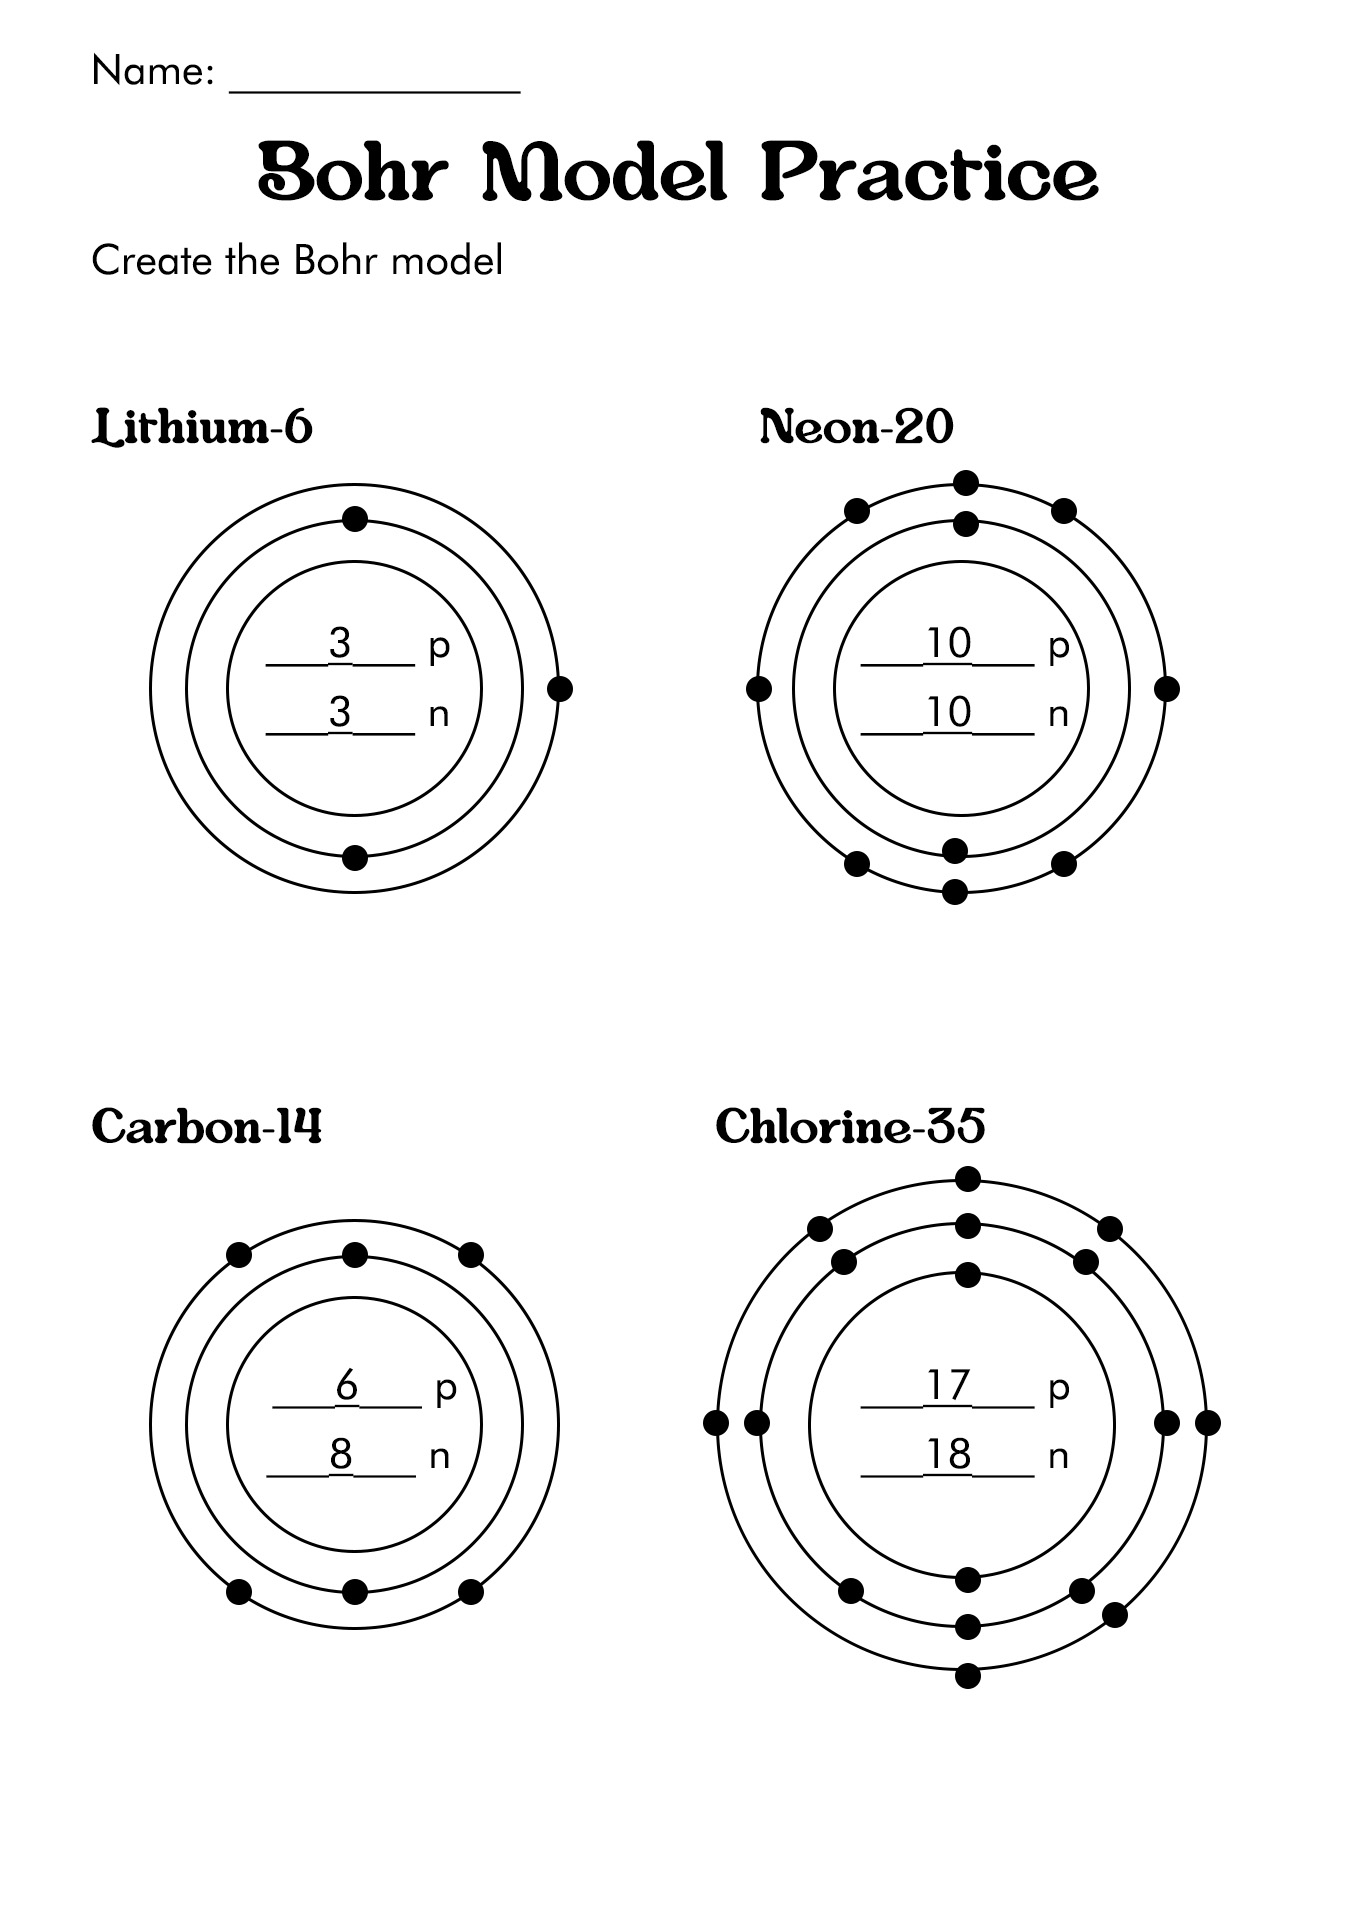 Bohr Model of the Atom Worksheet Answers Image